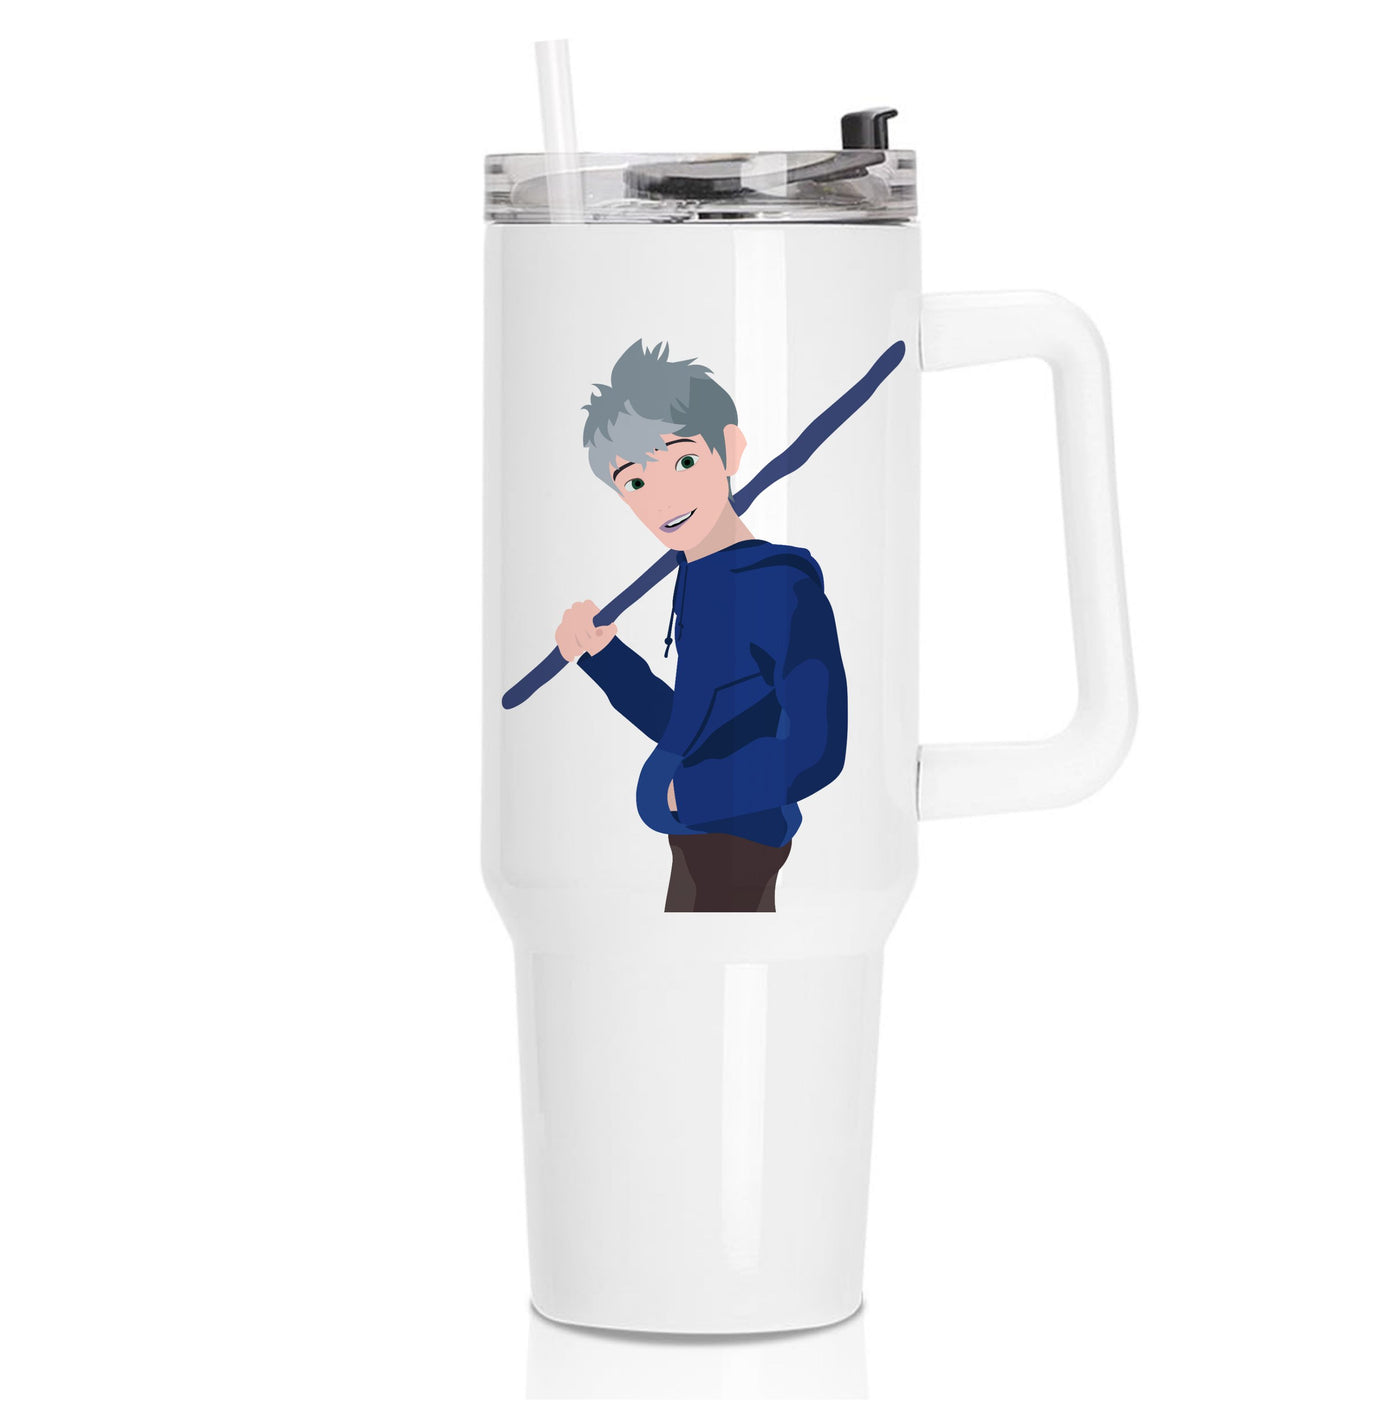 The Jack Frost Tumbler